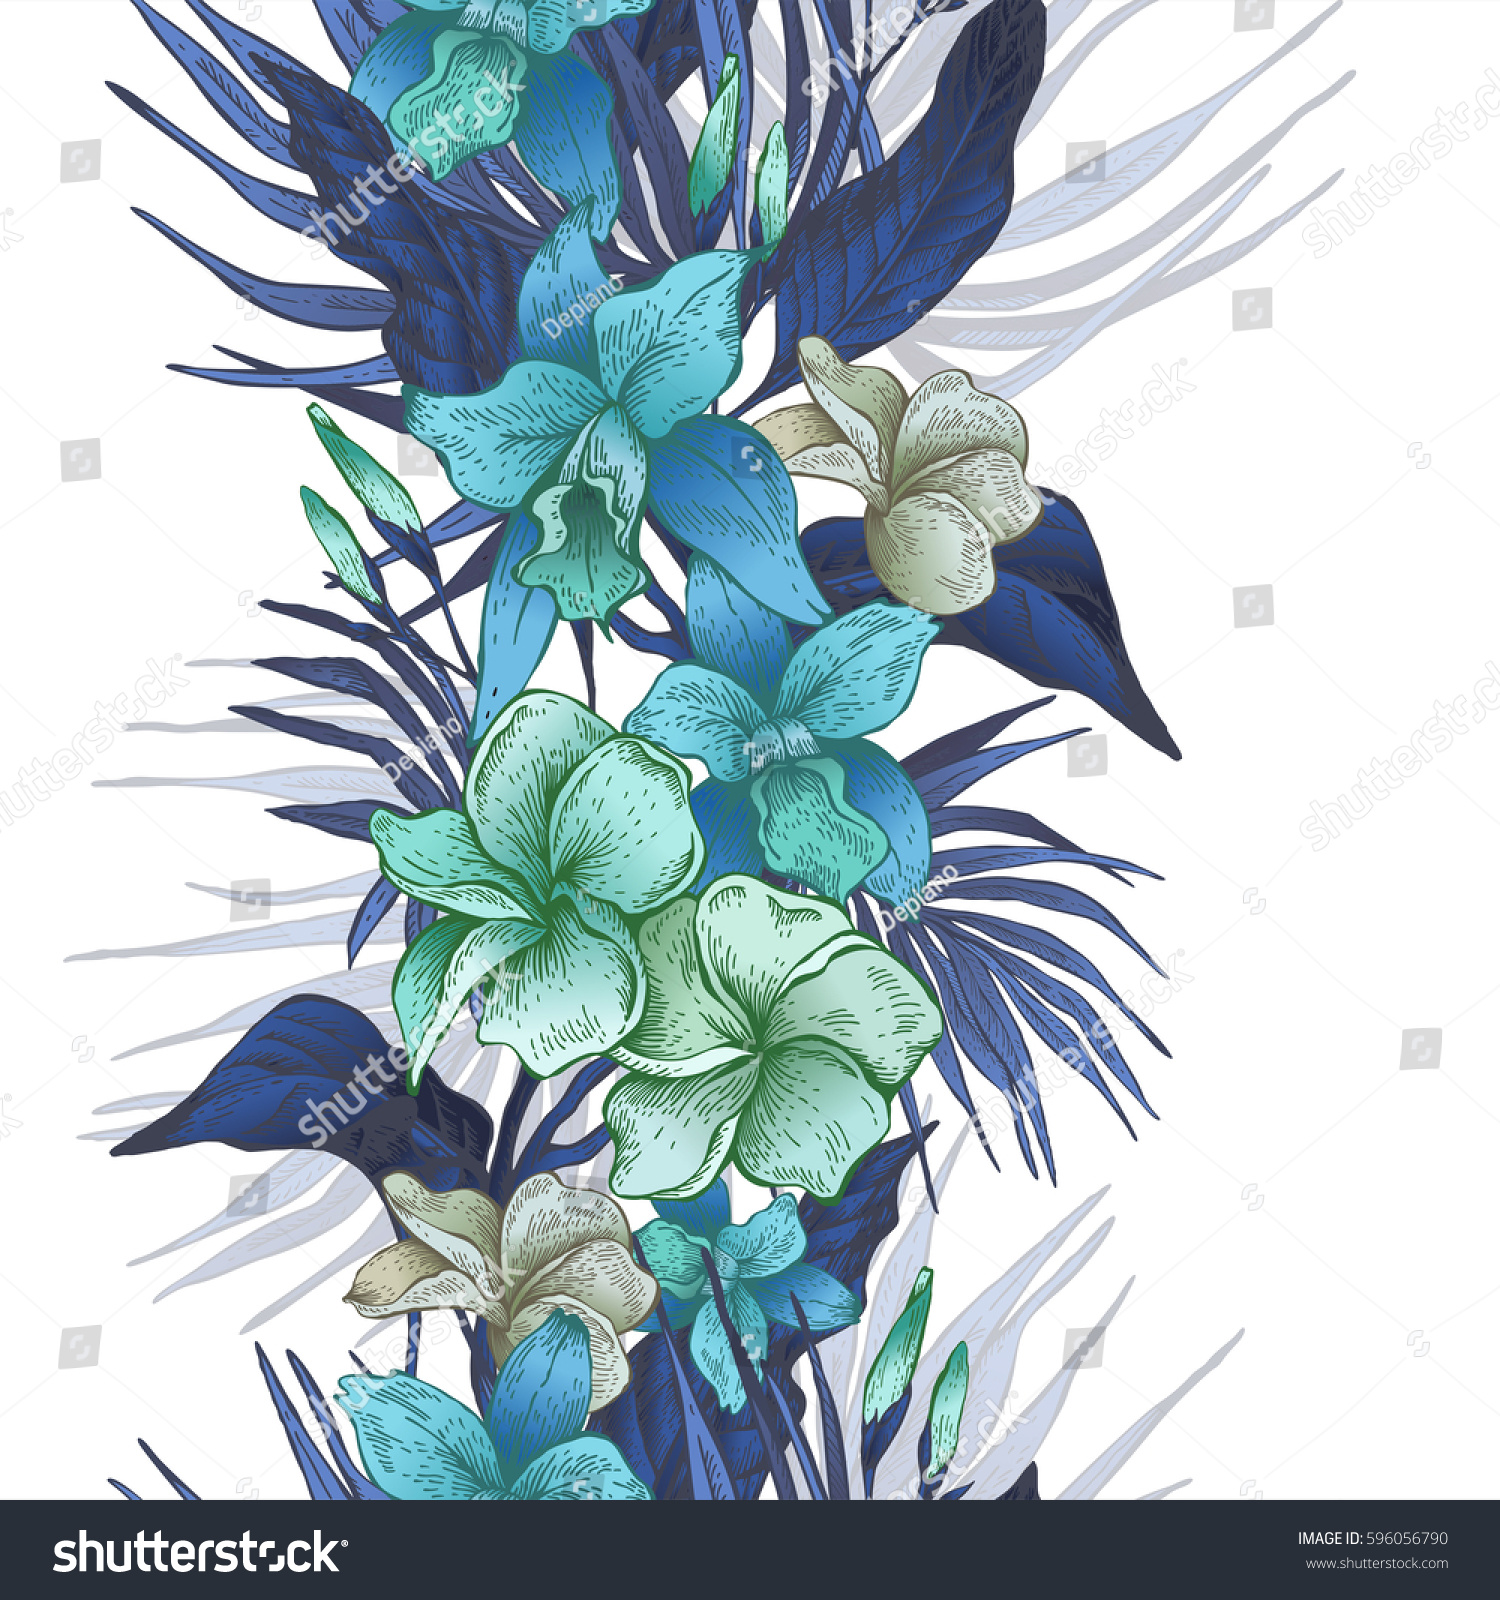 Exotic flowers in dark blue and green borders